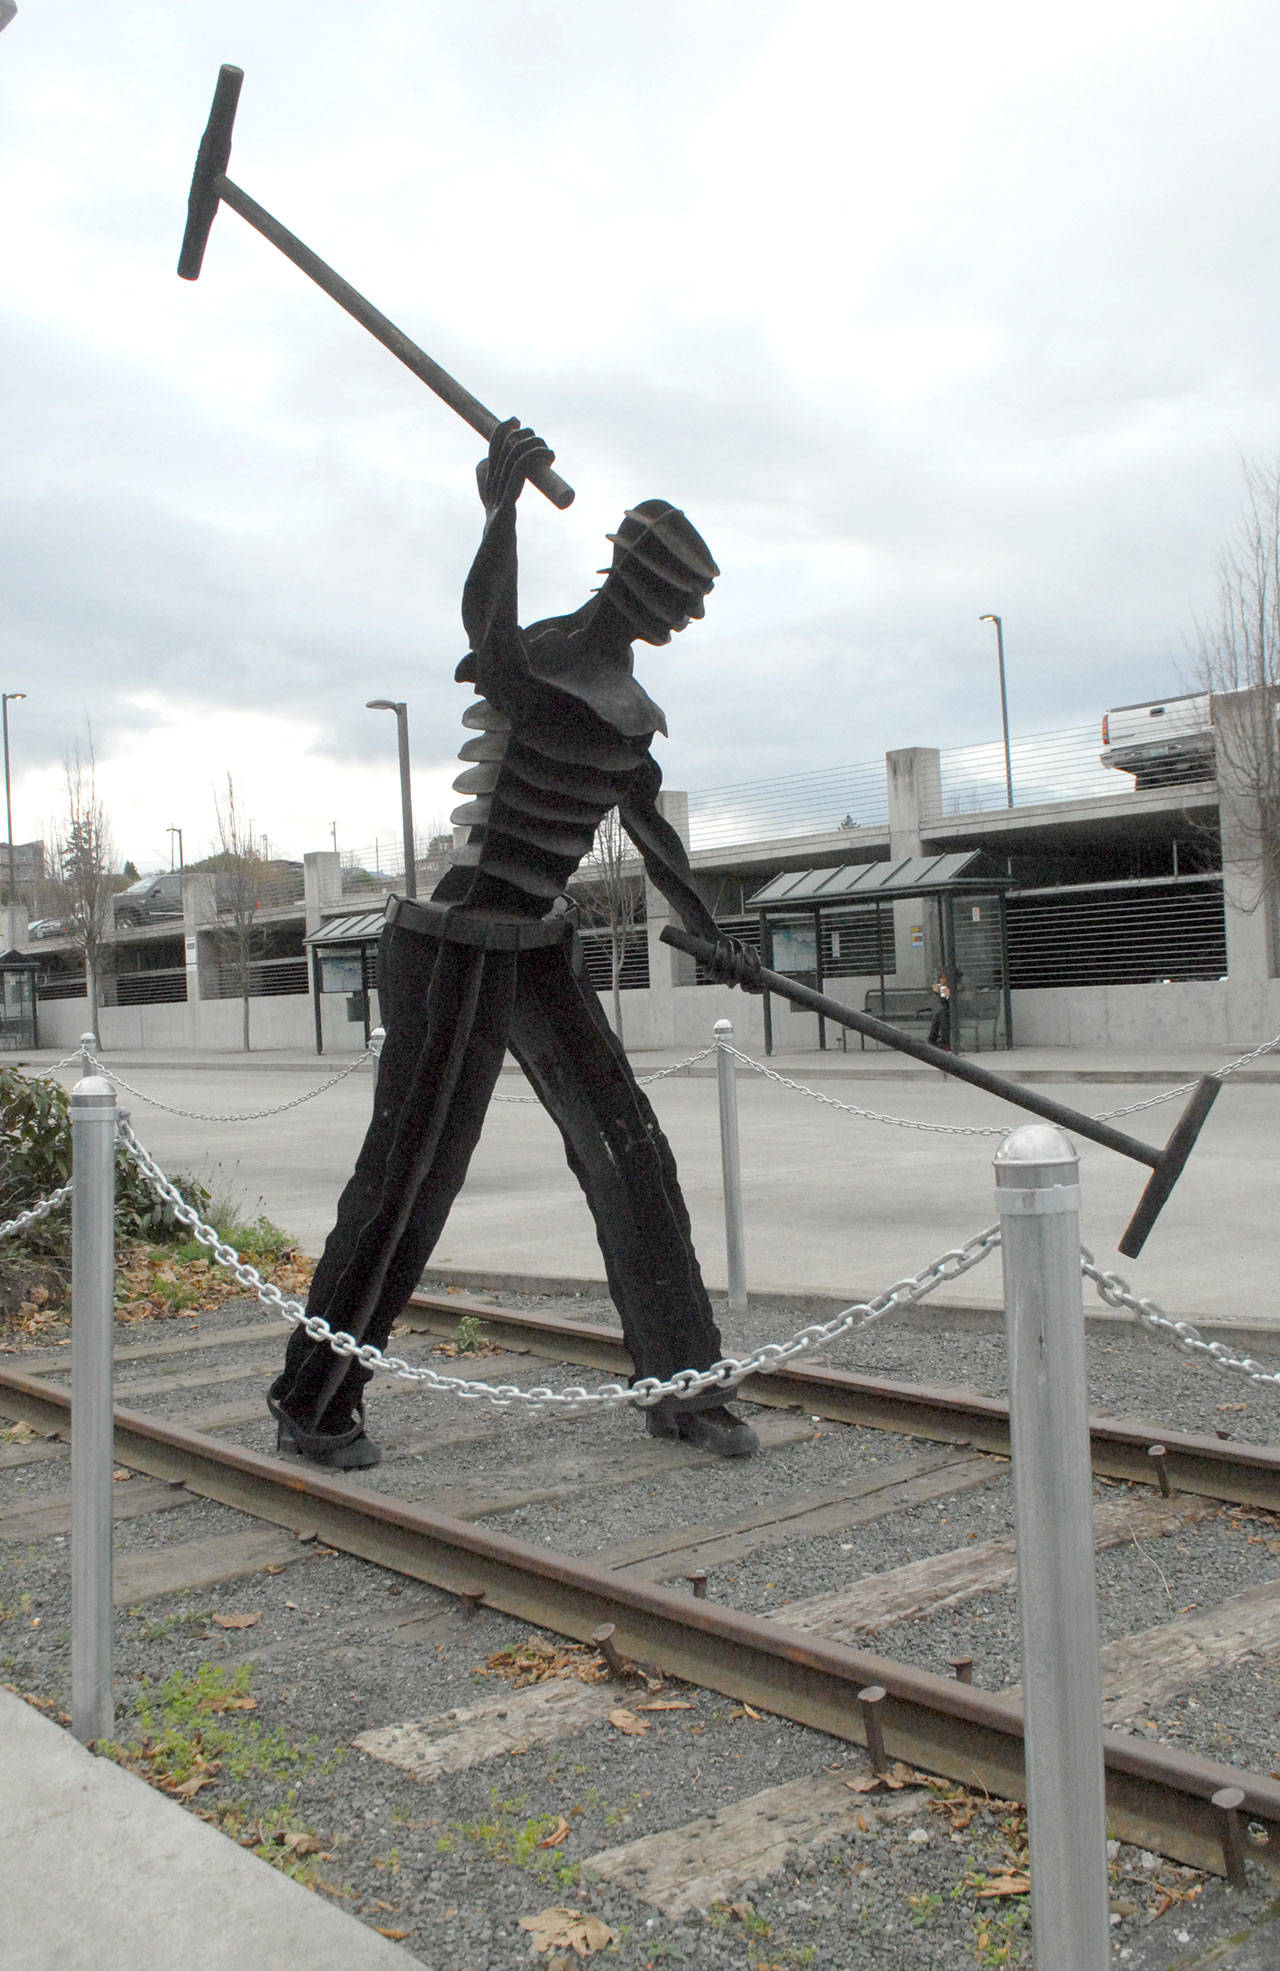 The sculpture “Gandy Dancer” by artist Jim Mattern stands at its current location at The Gateway transit center in downtown Port Angeles after being displaced twice since its acquisition in 2003. (Keith Thorpe/Peninsula Daily News)